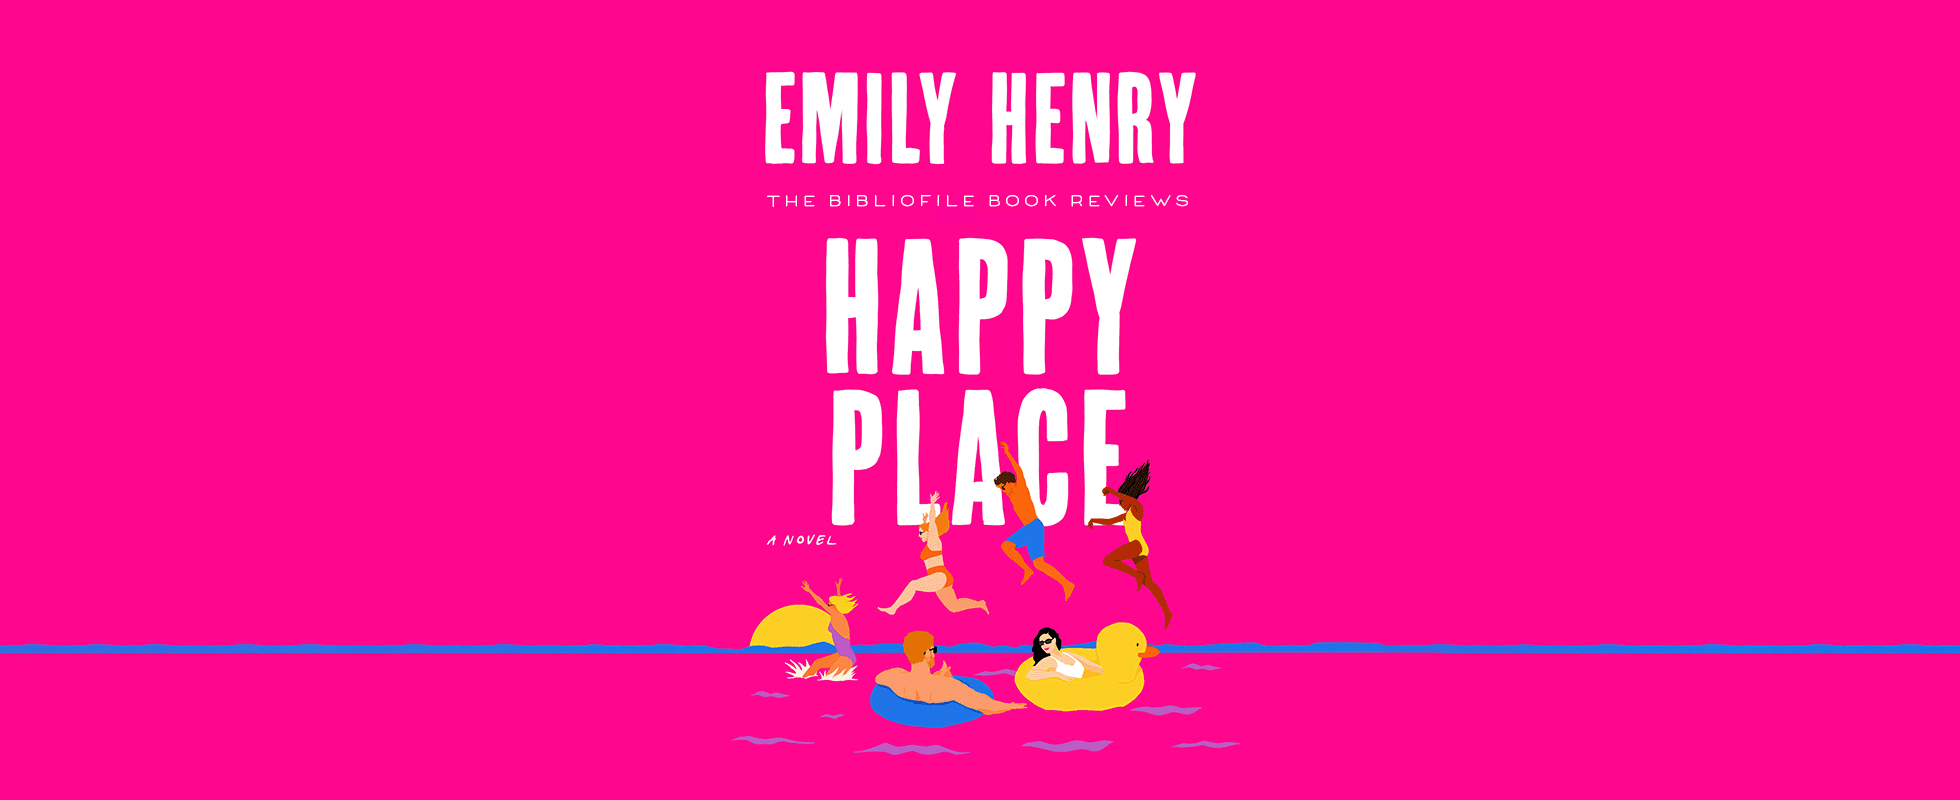 happy place by emily henry book review plot summary synopsis recap discussion spoilers